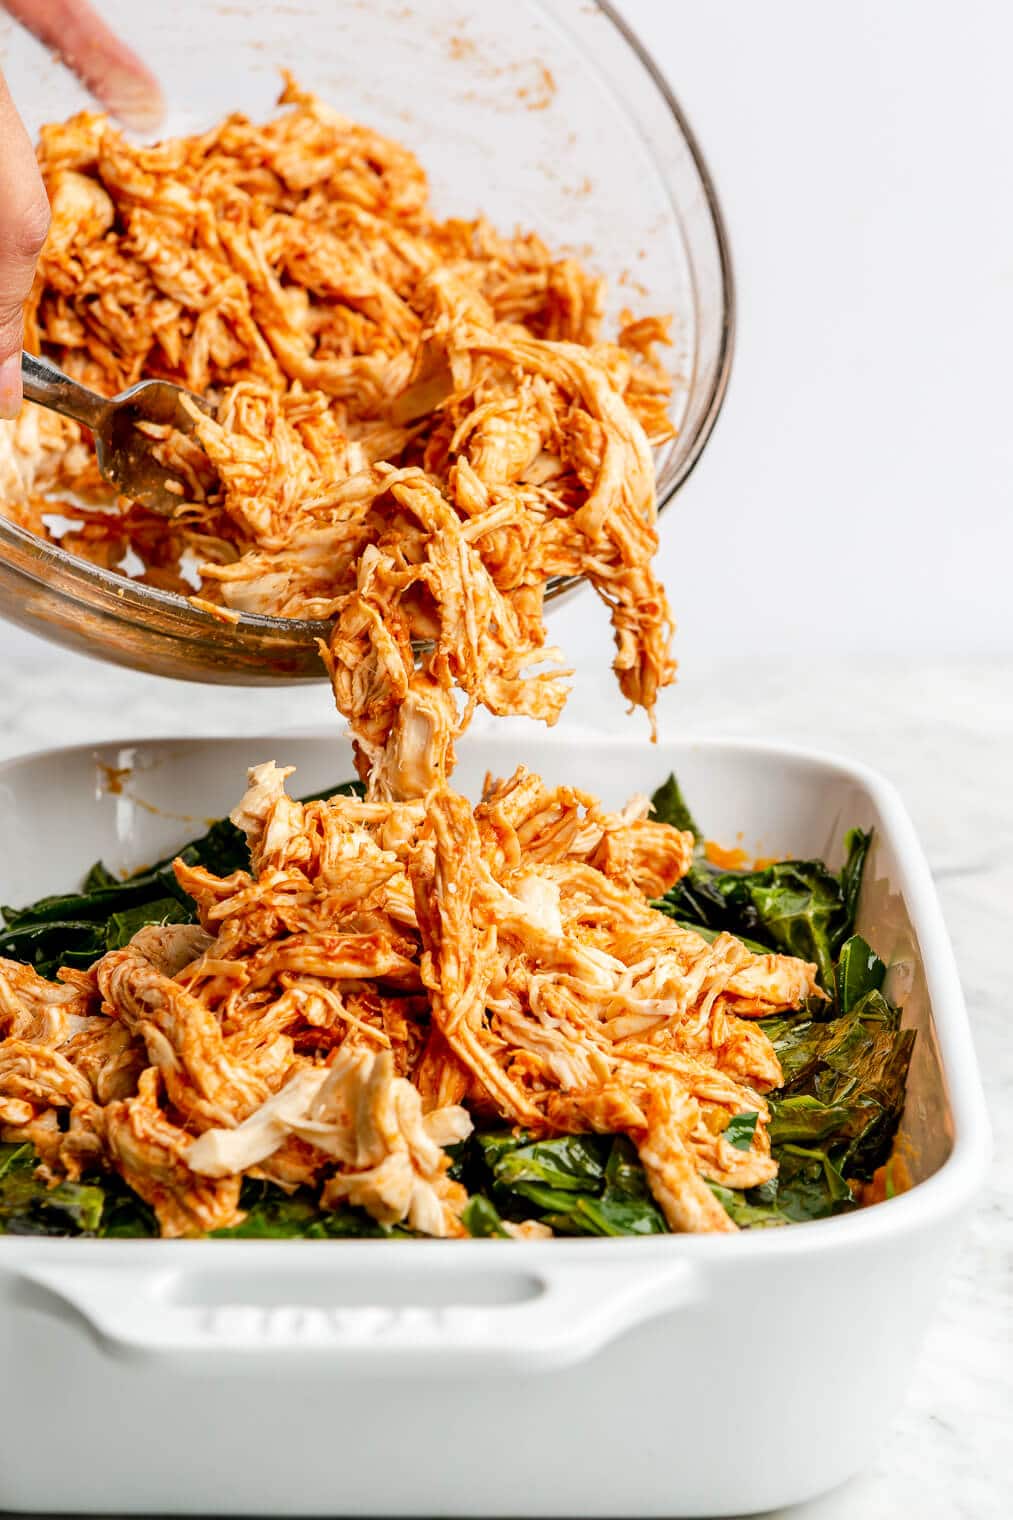 A person spooning shredded BBQ chicken over sweet potato and kale in a casserole dish.